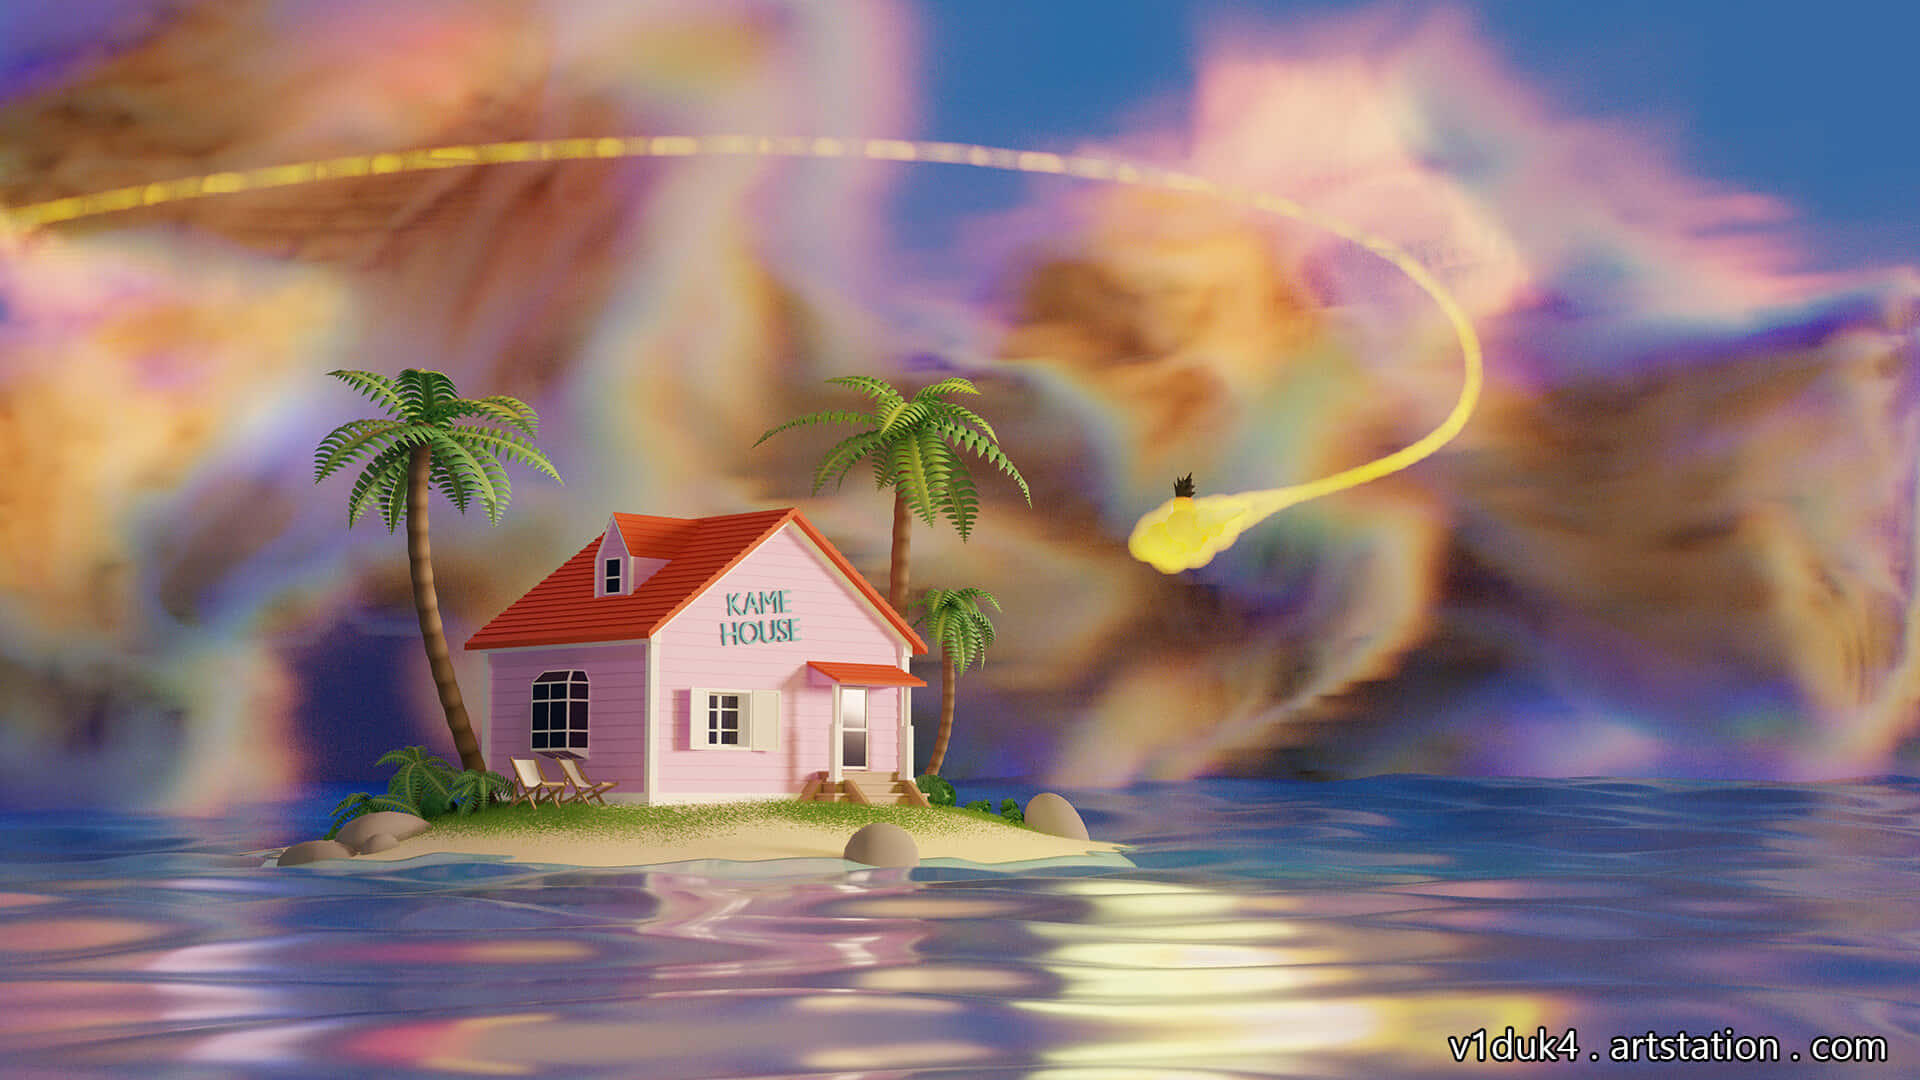 Welcome to Kame House! Wallpaper